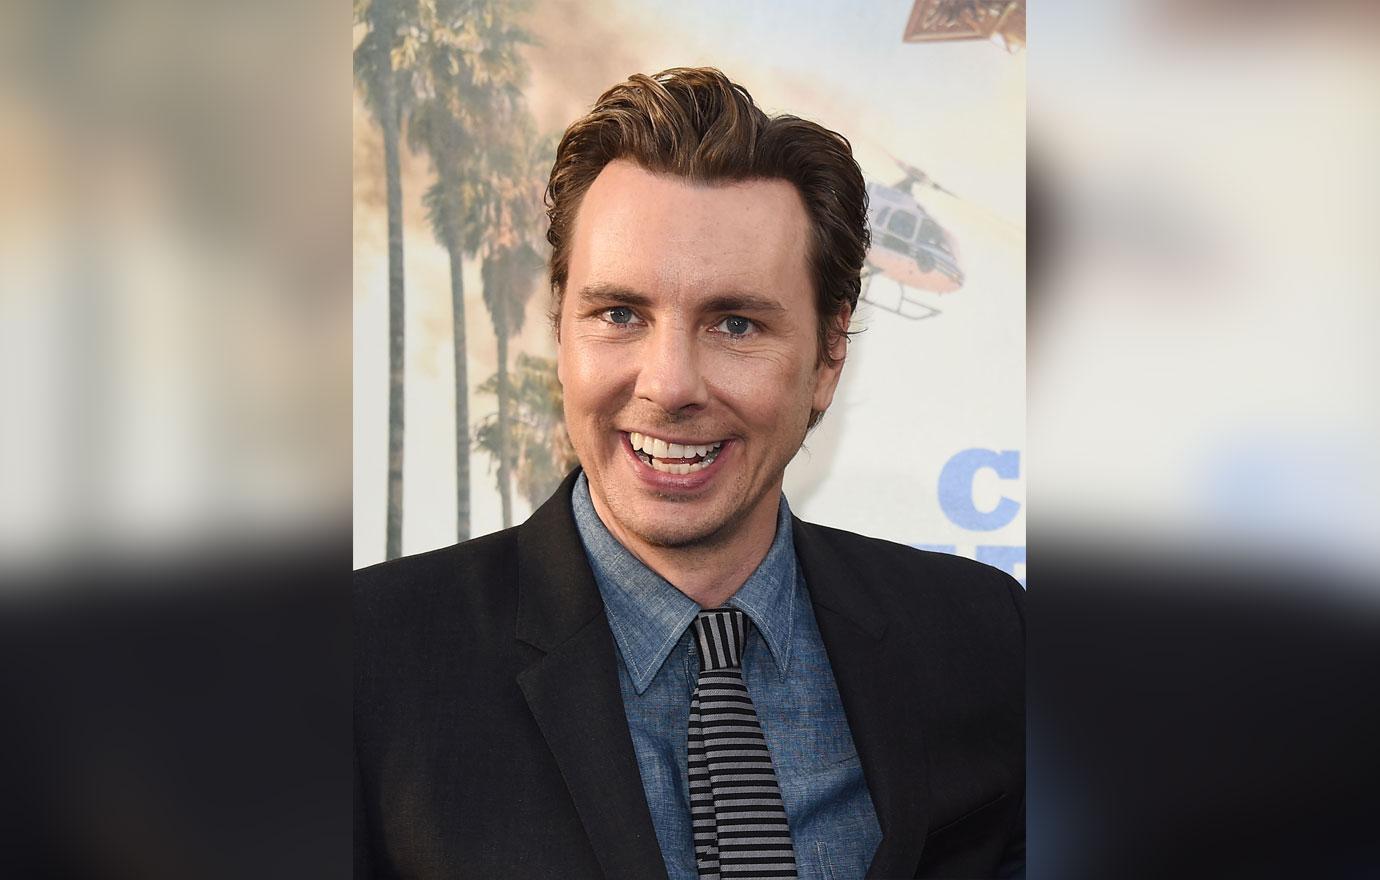 Dax Shepard Tells Dr Phil He Thinks He Was A Sex Addict